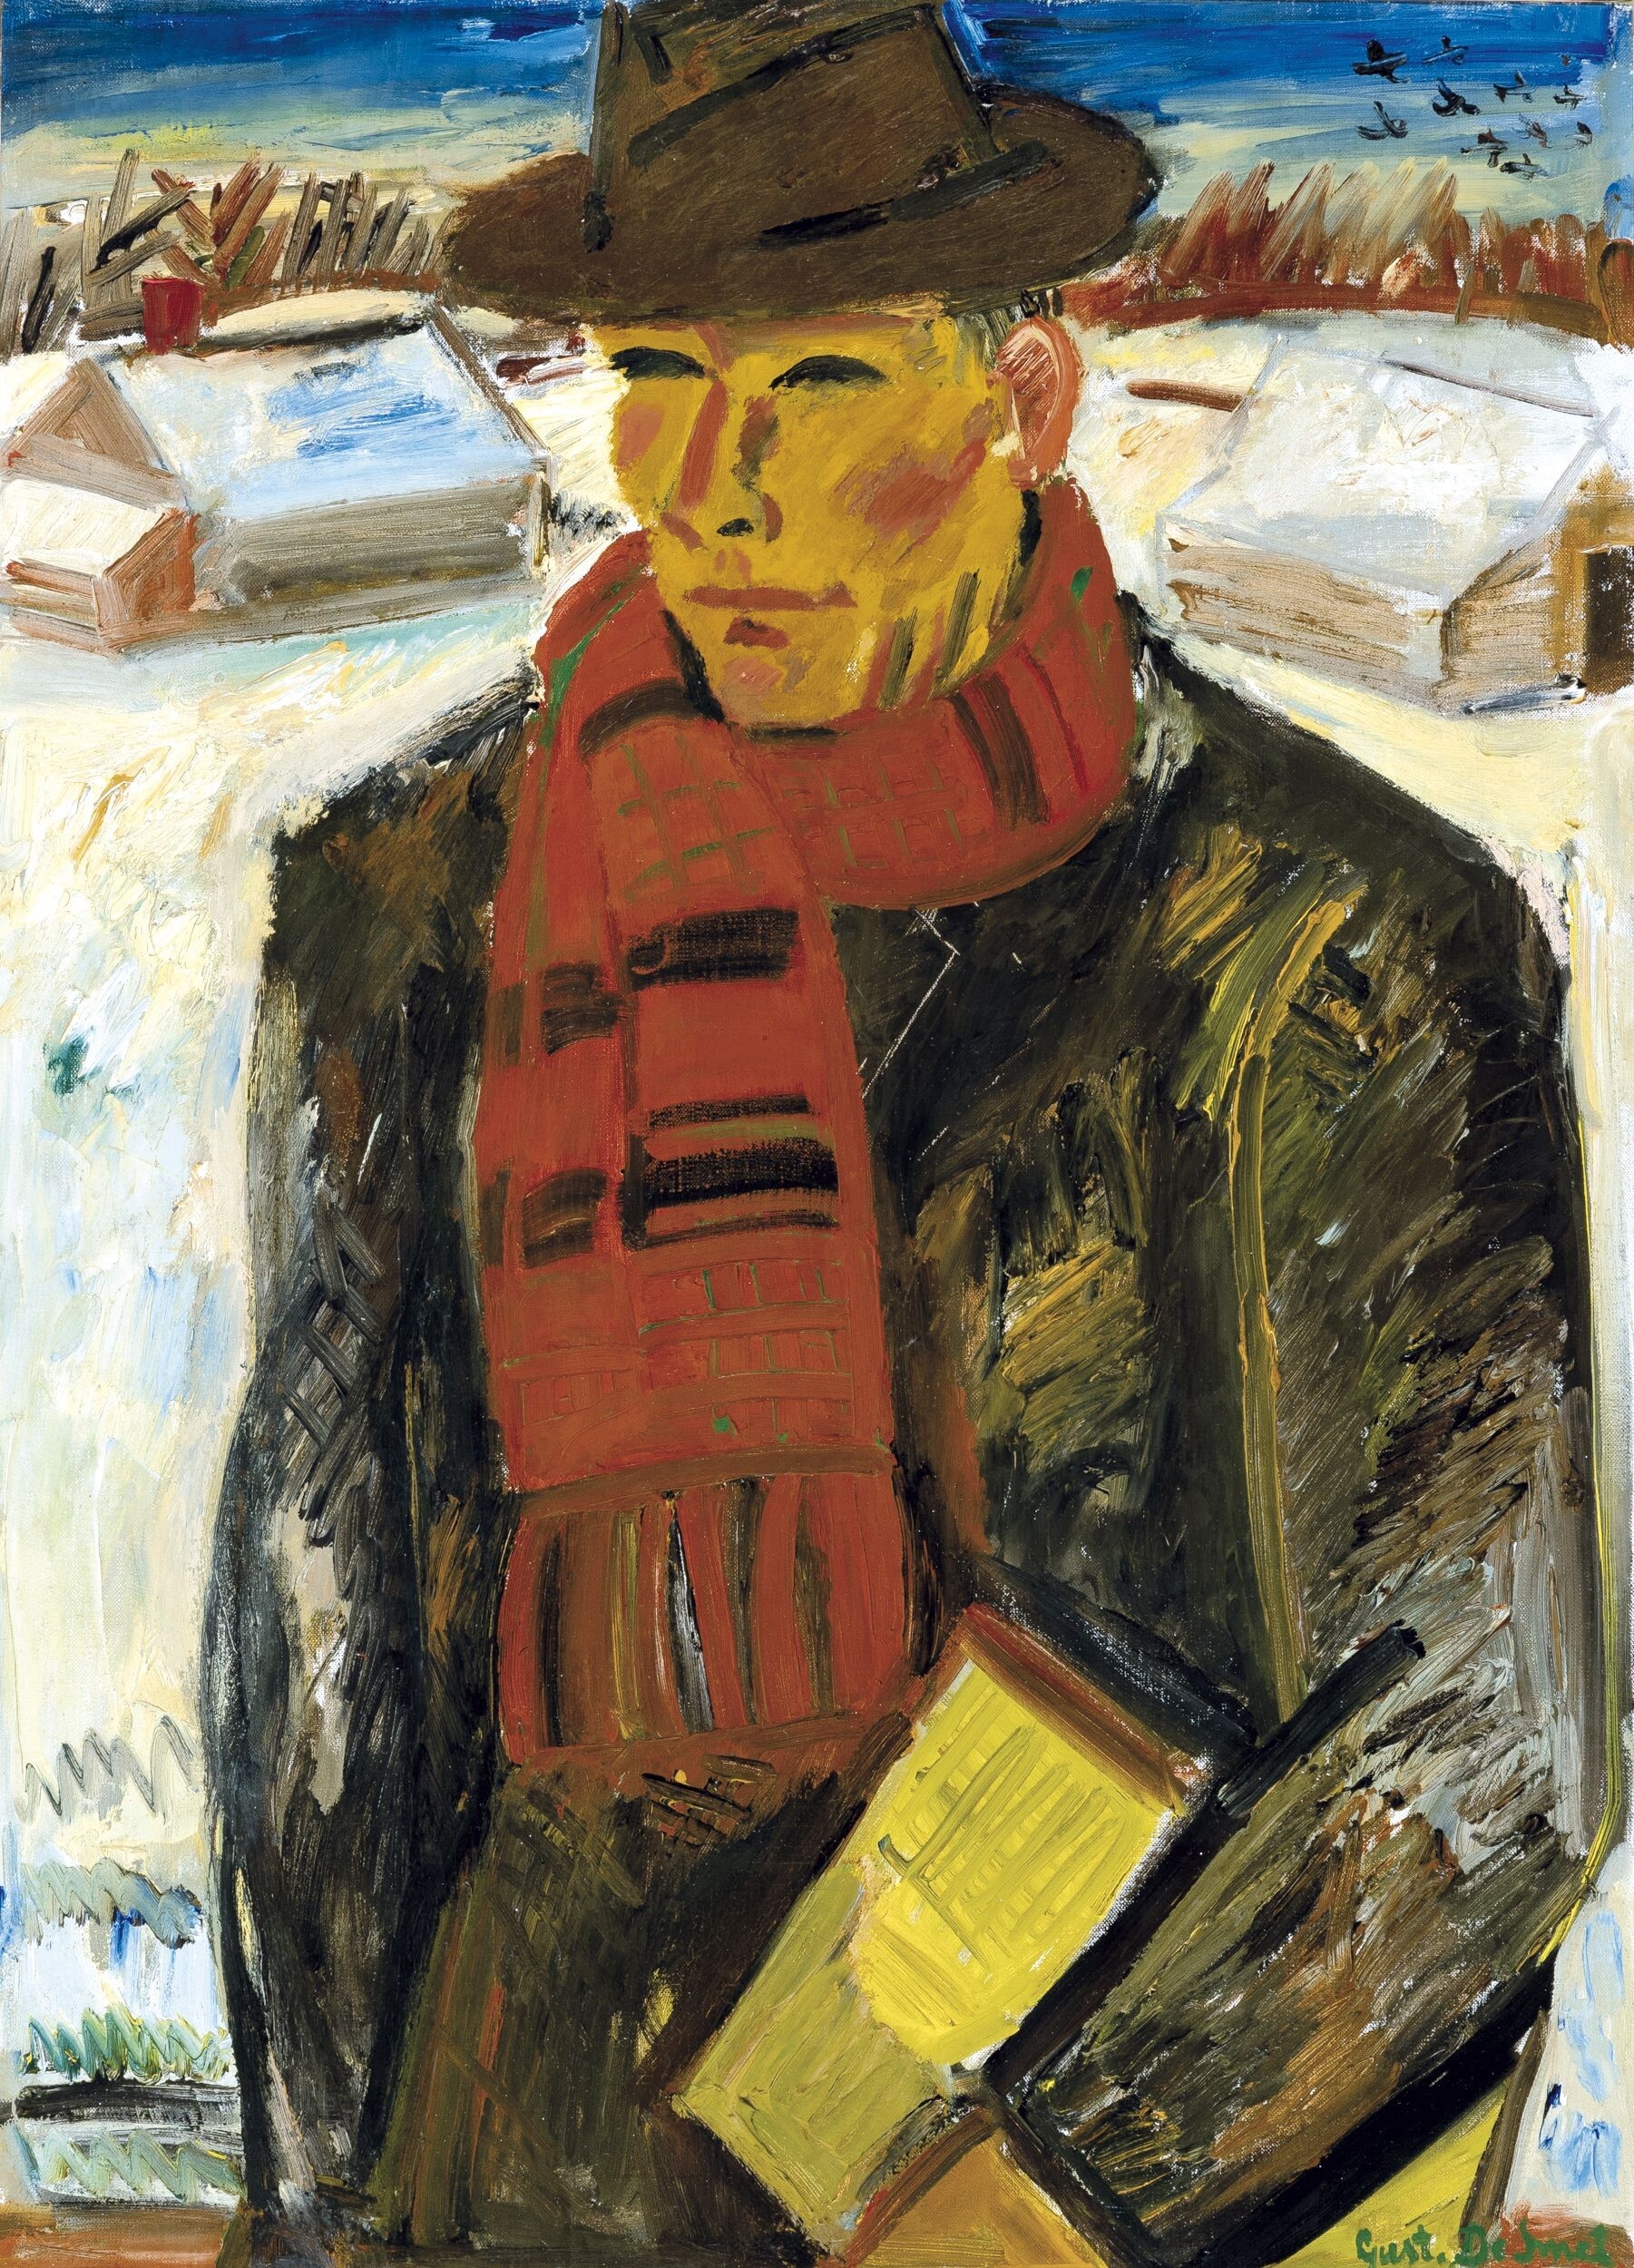 Portrait of the artist (A walk in the snow) by Gustave de Smet, 1937